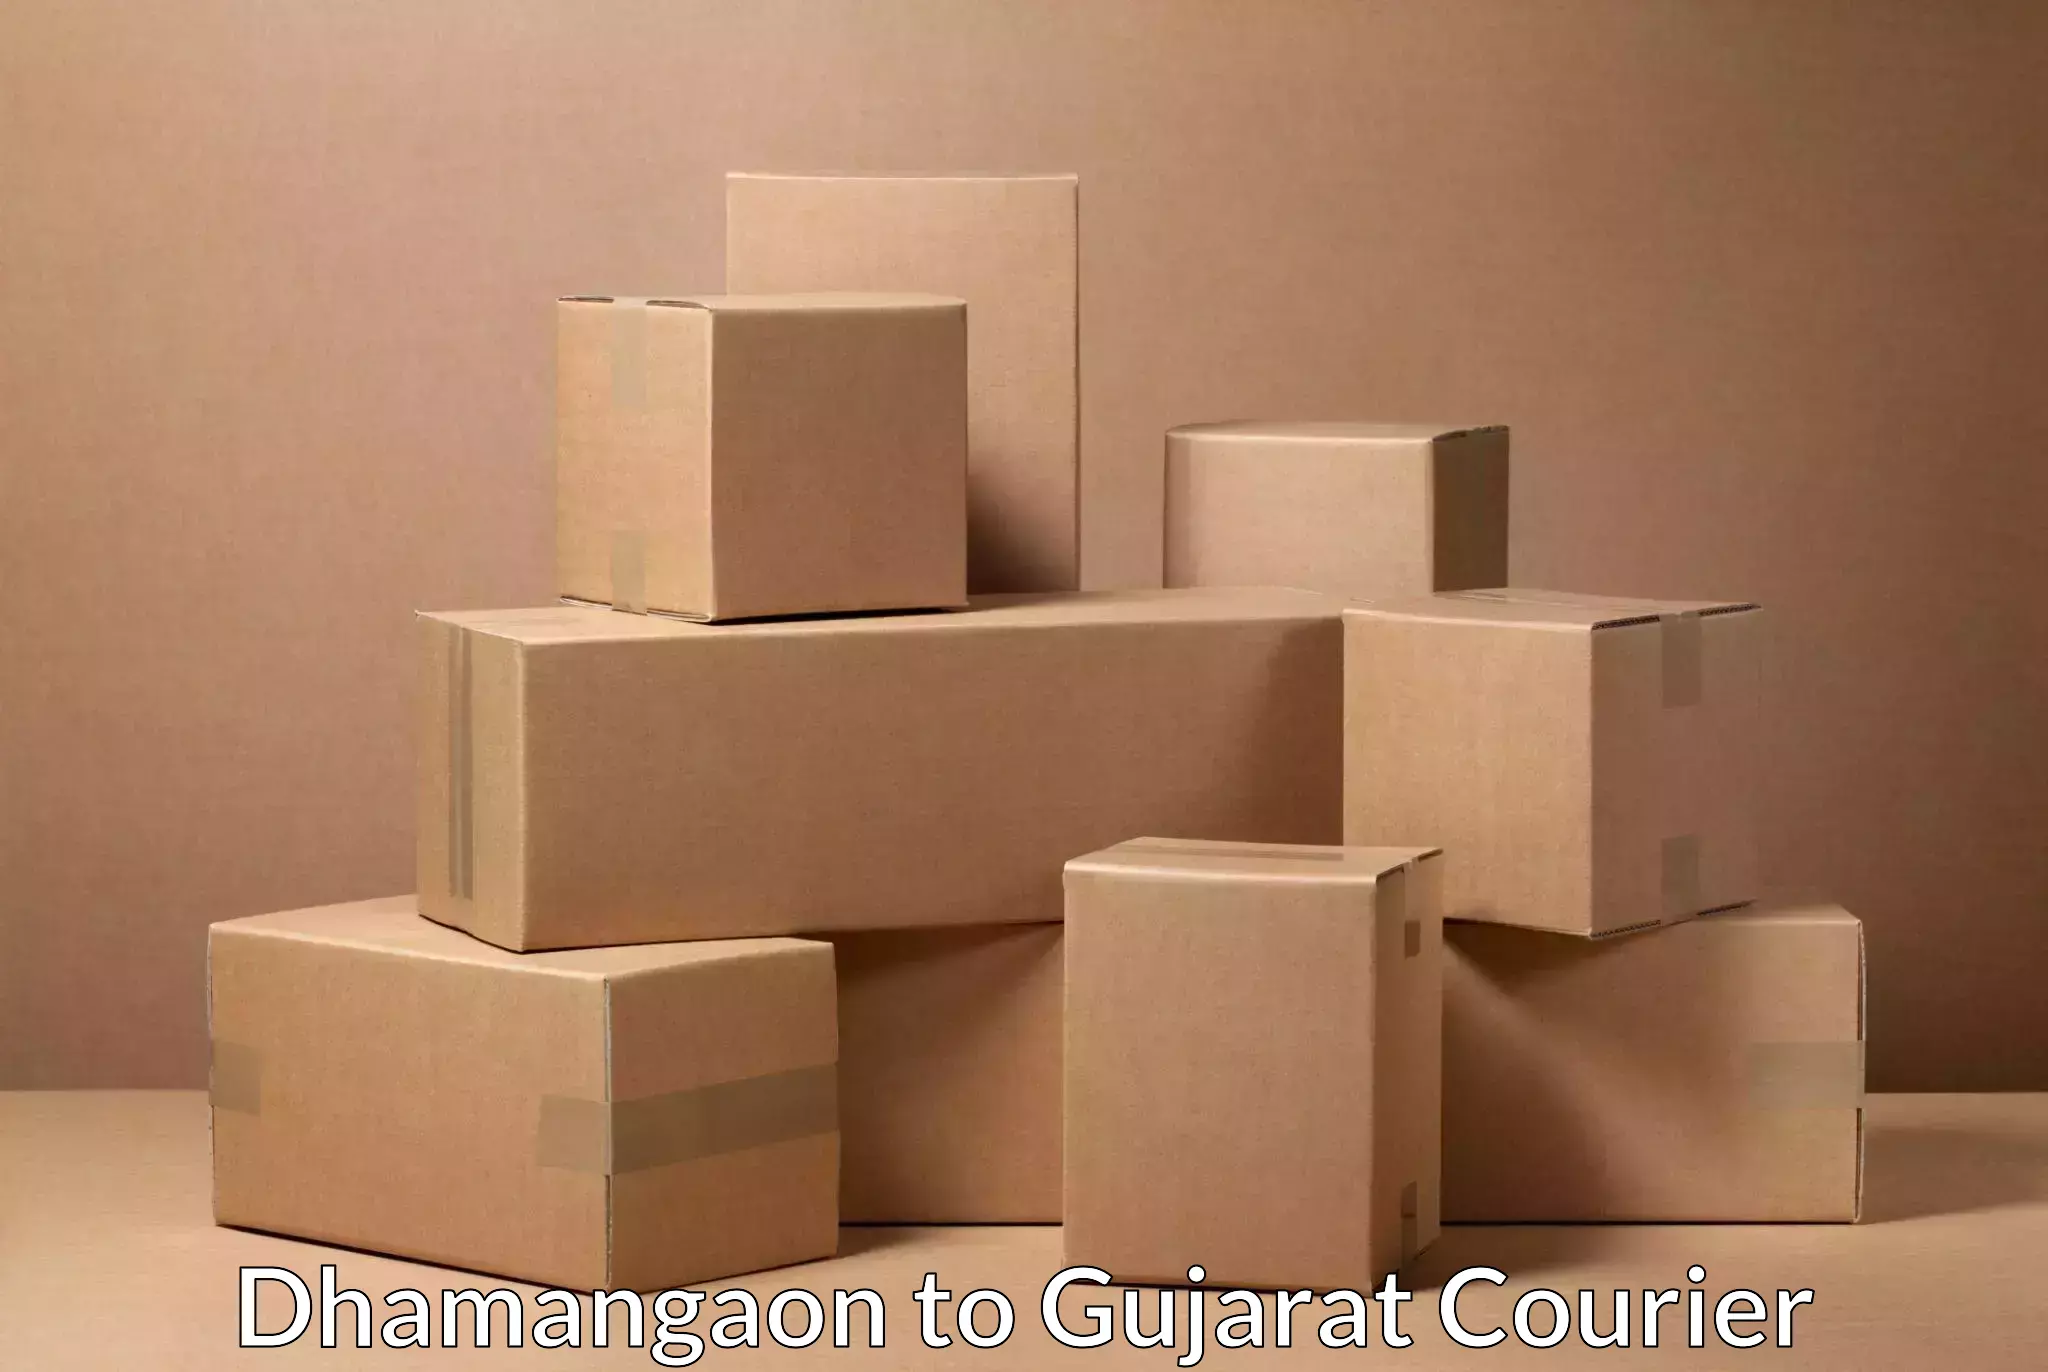 Courier service comparison Dhamangaon to Dharmasala